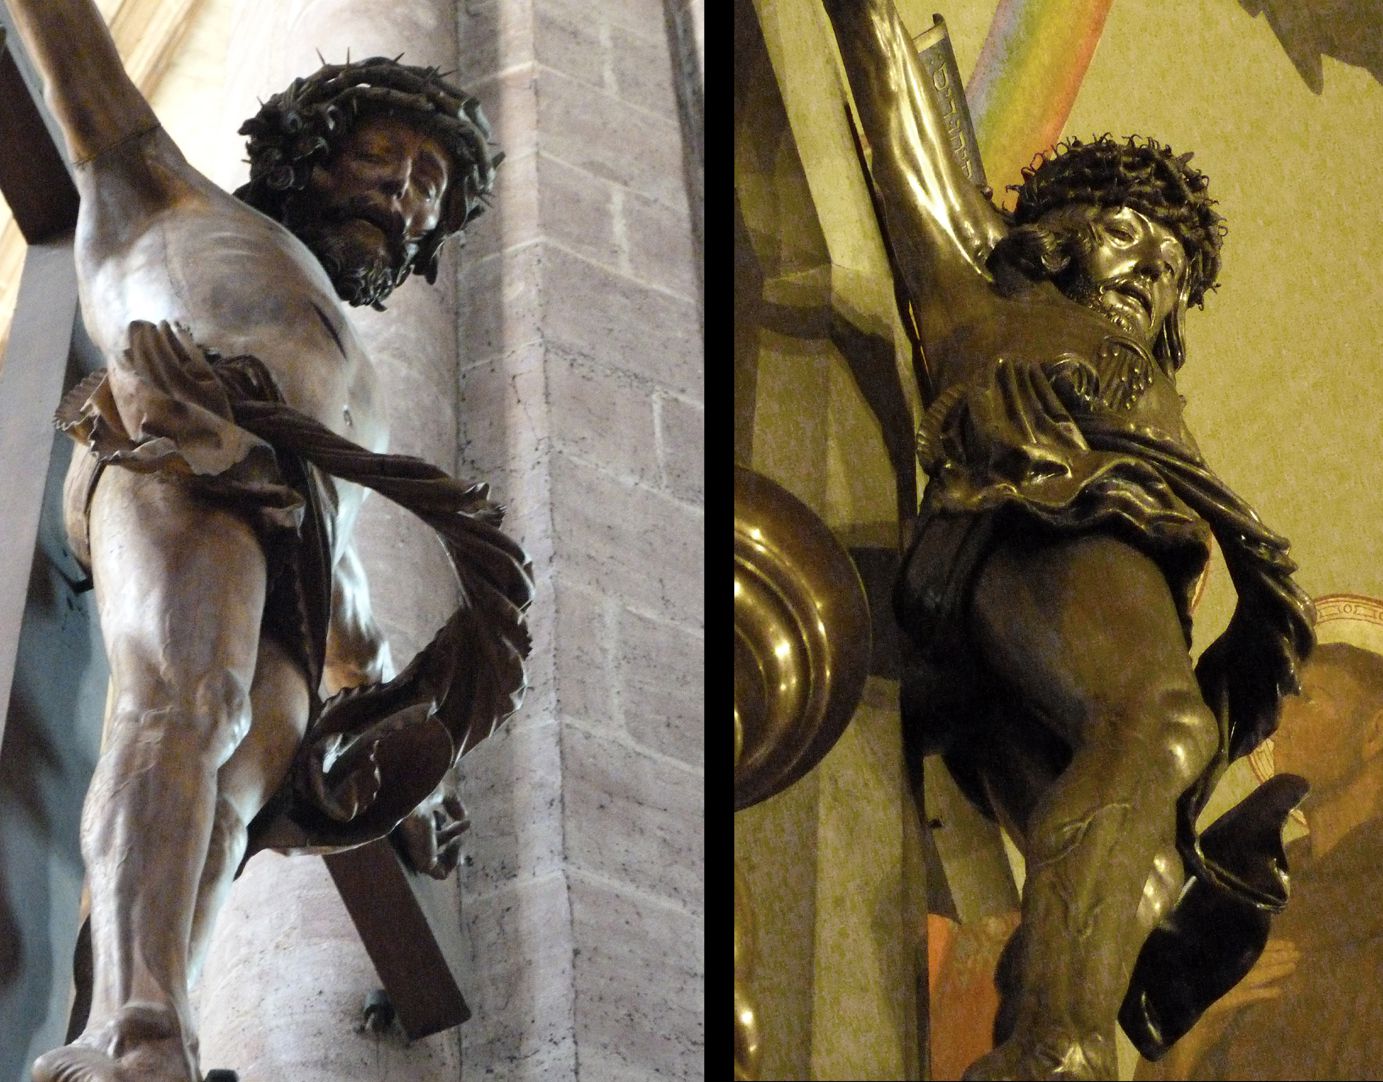 Crucifix Comparison with crucifix (1520) by VeiT Stoss in St. Sebaldus Church, view from below, diagonal view from below with flying loin cloth